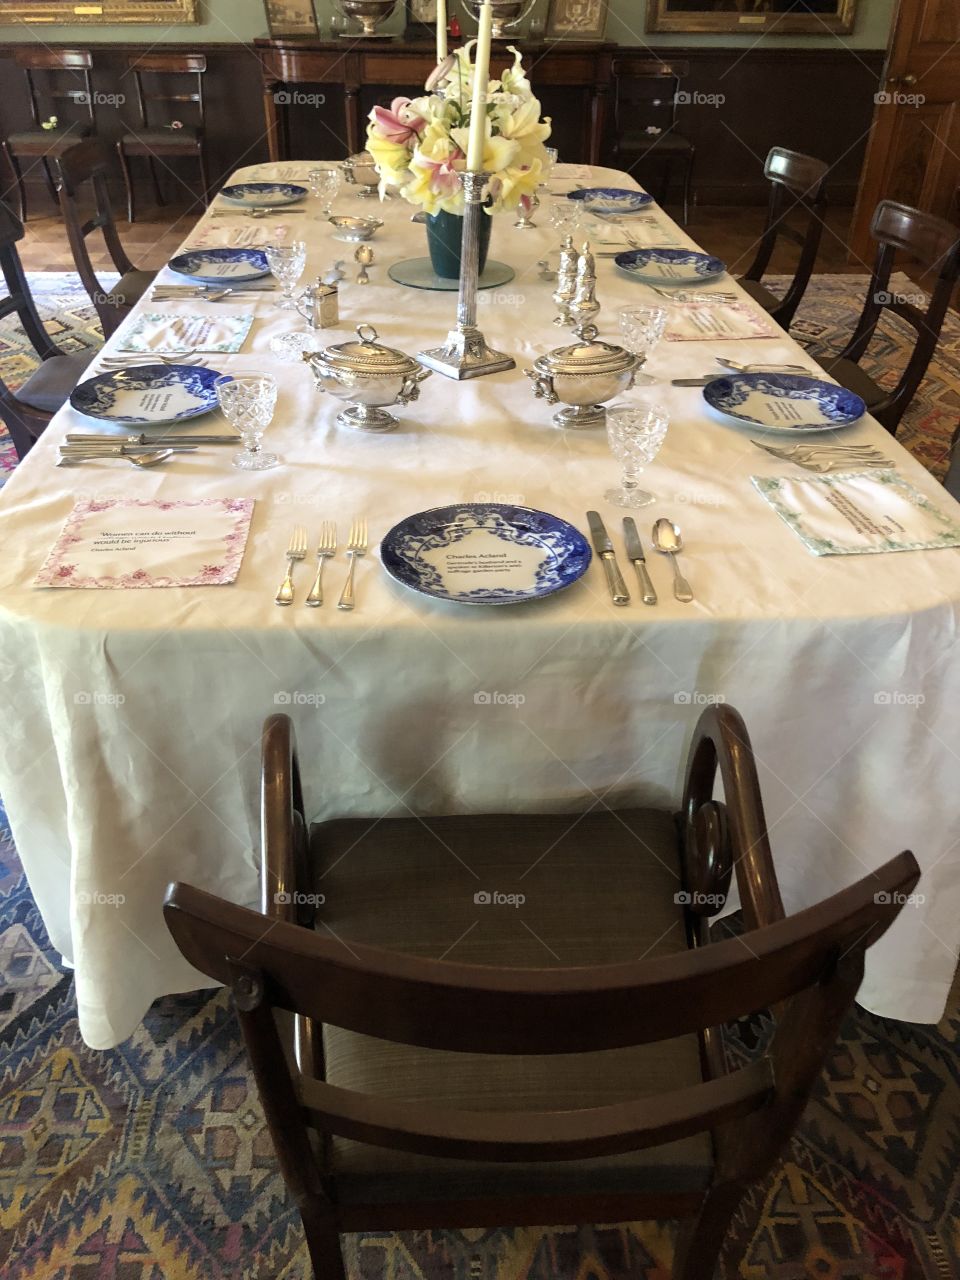 A typical table used by the suffragette movement or their opponents. Political debate at the dining table was expected 100 years ago.